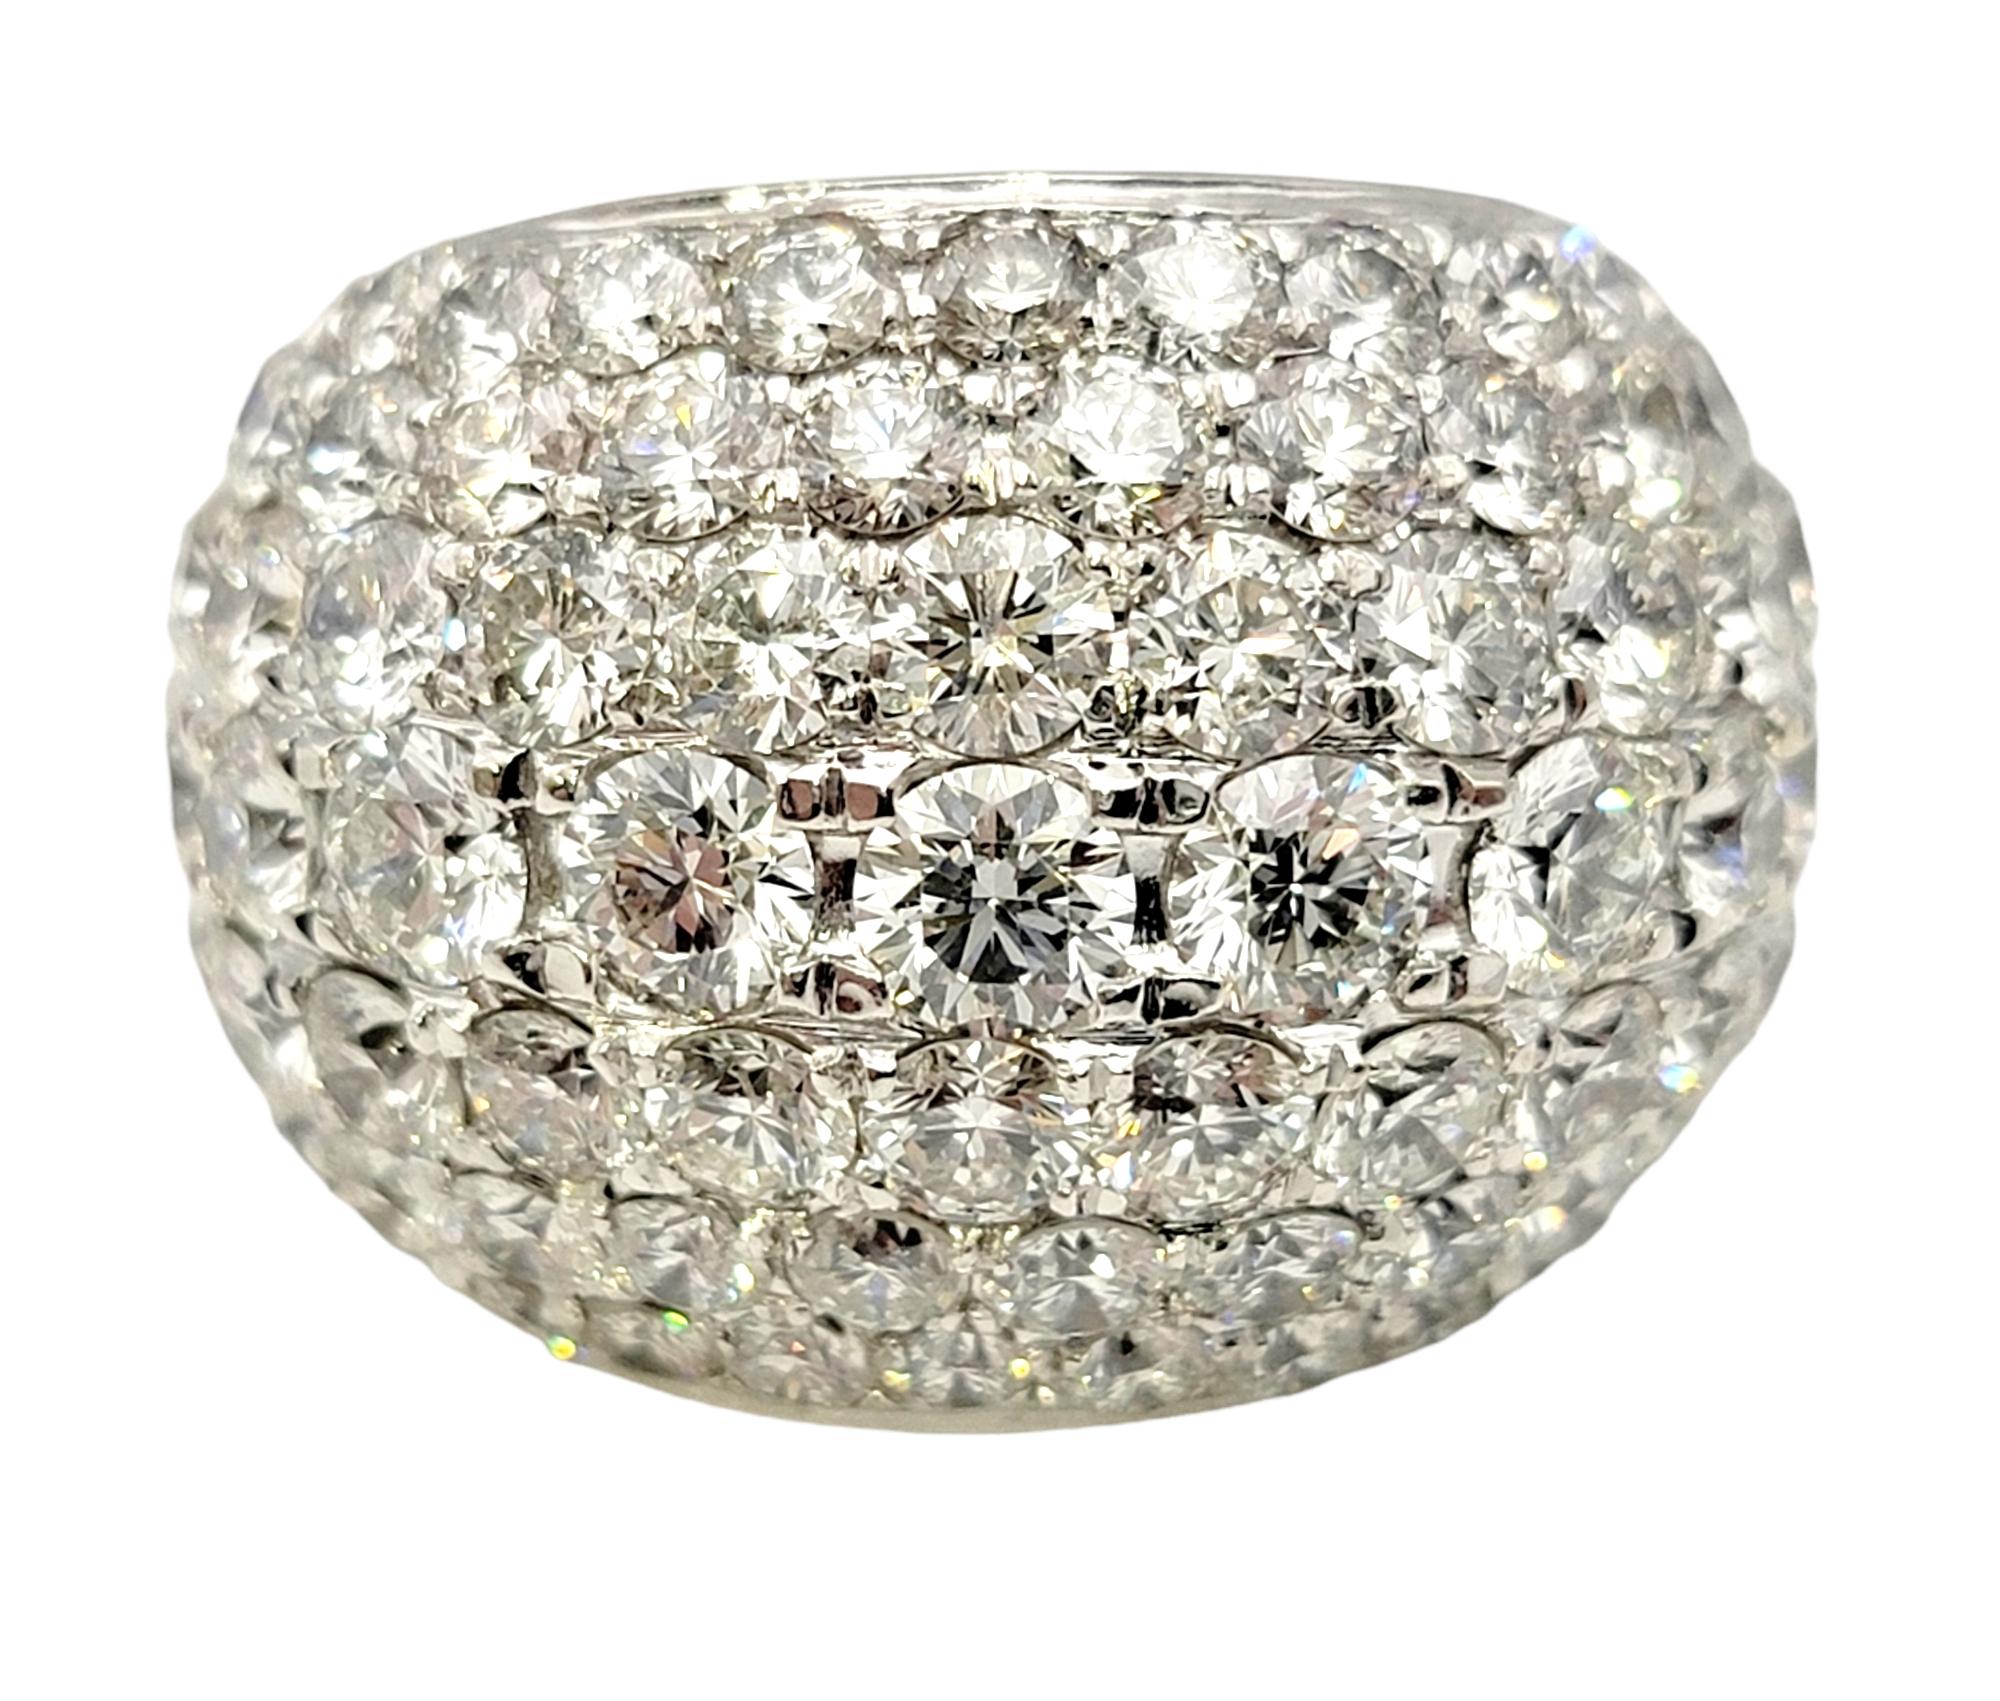 Ring size: 7

You will absolutely fall head over heels in love with this stunningly sparkly diamond dome ring. An impressive 9.00 carats of incredible bright white natural diamonds fill this extraordinary piece from end to end, forming an elegant